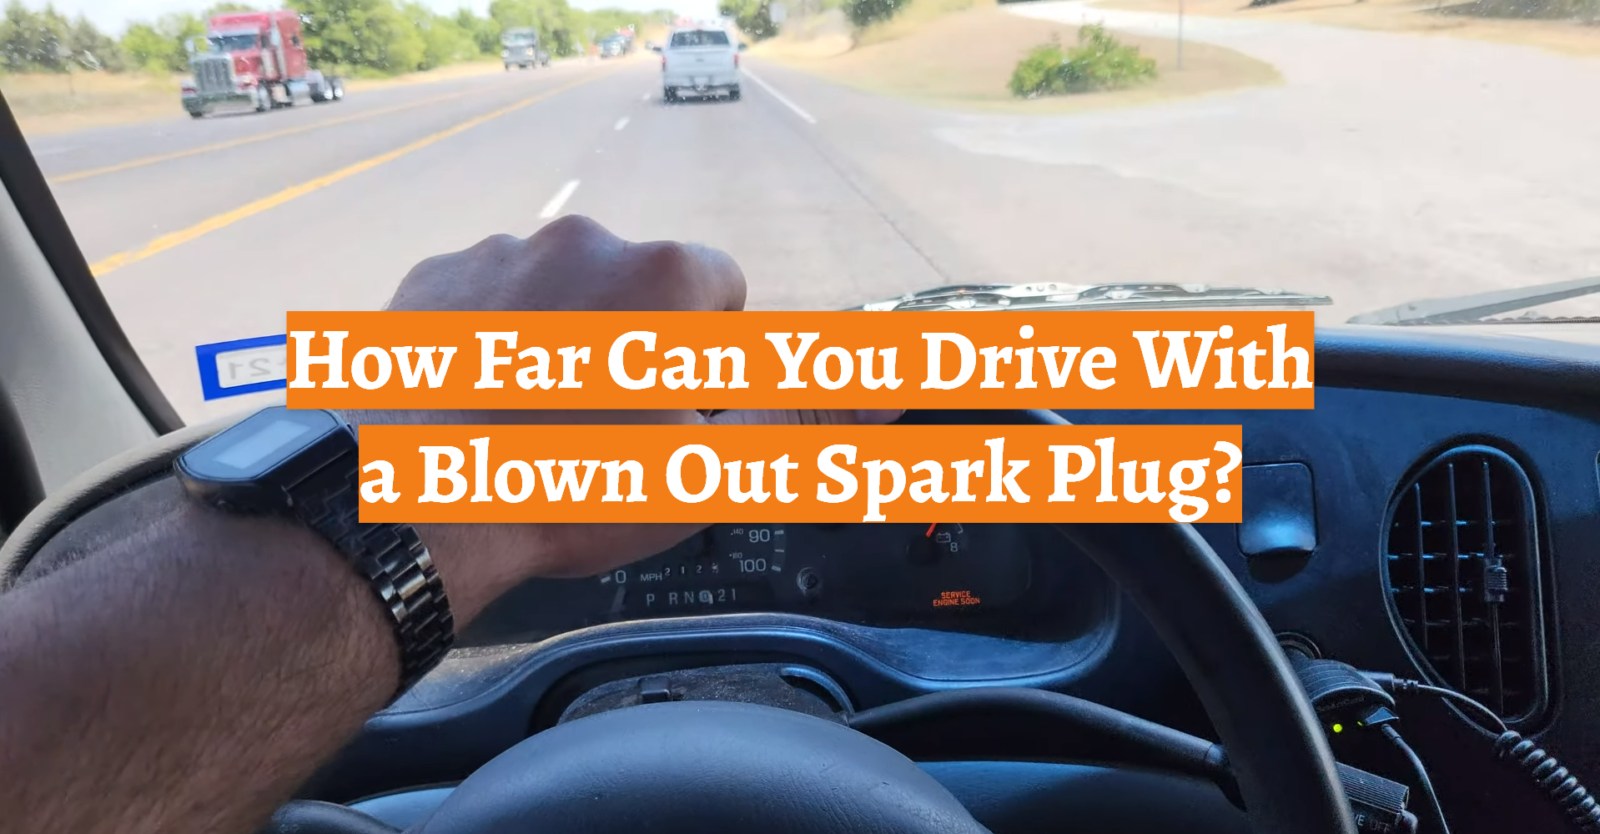 How Far Can You Drive With a Blown Out Spark Plug?